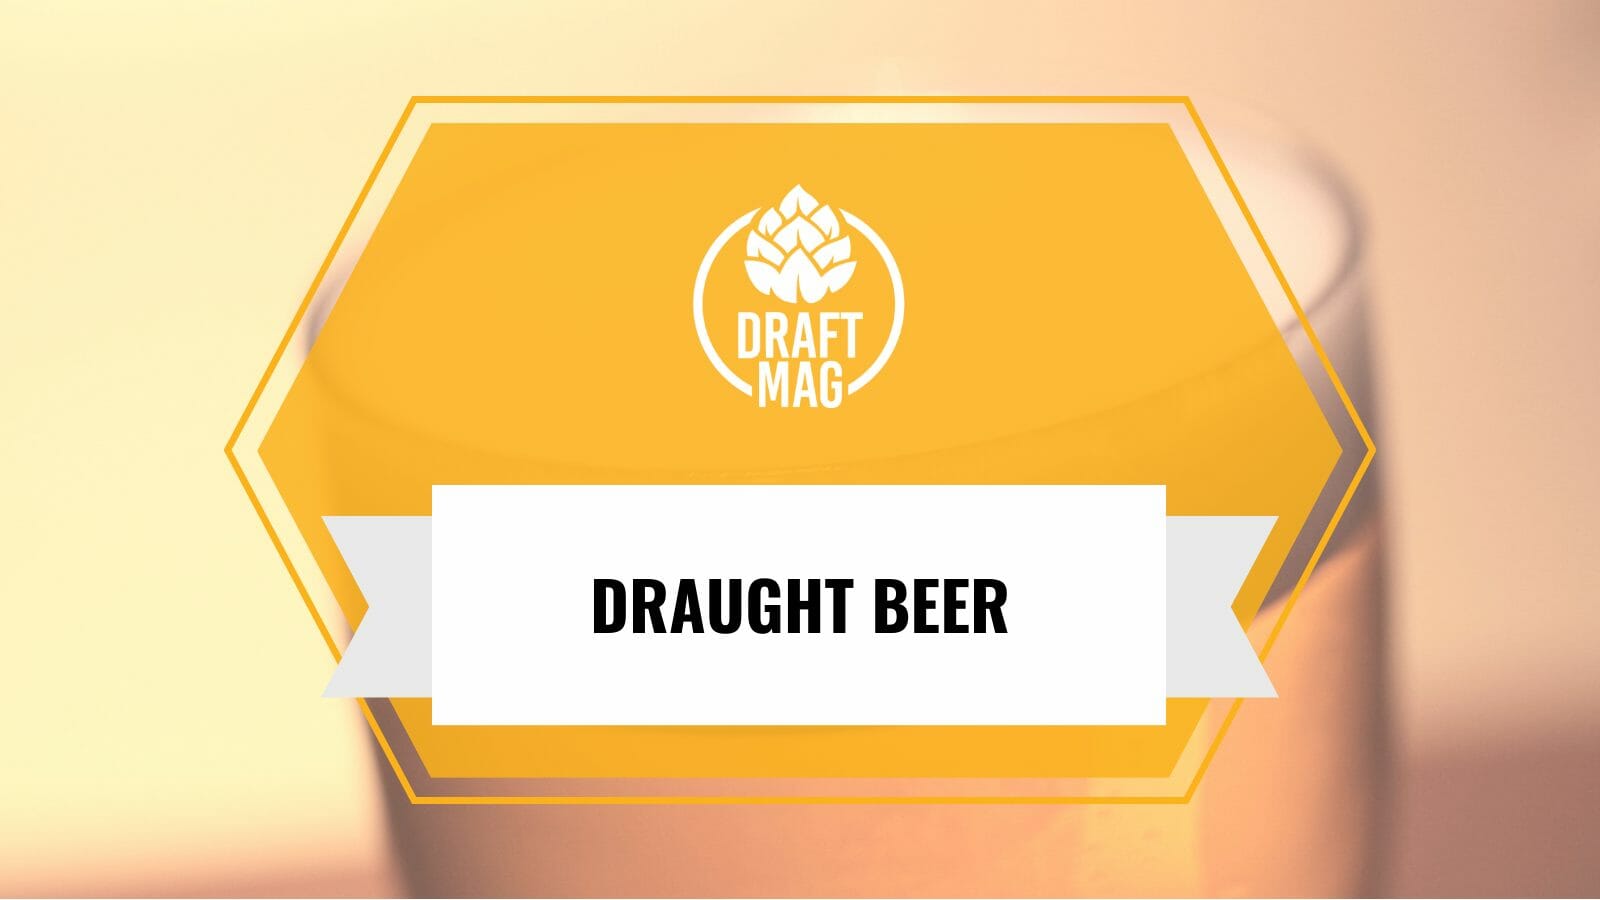 Draught beer guide